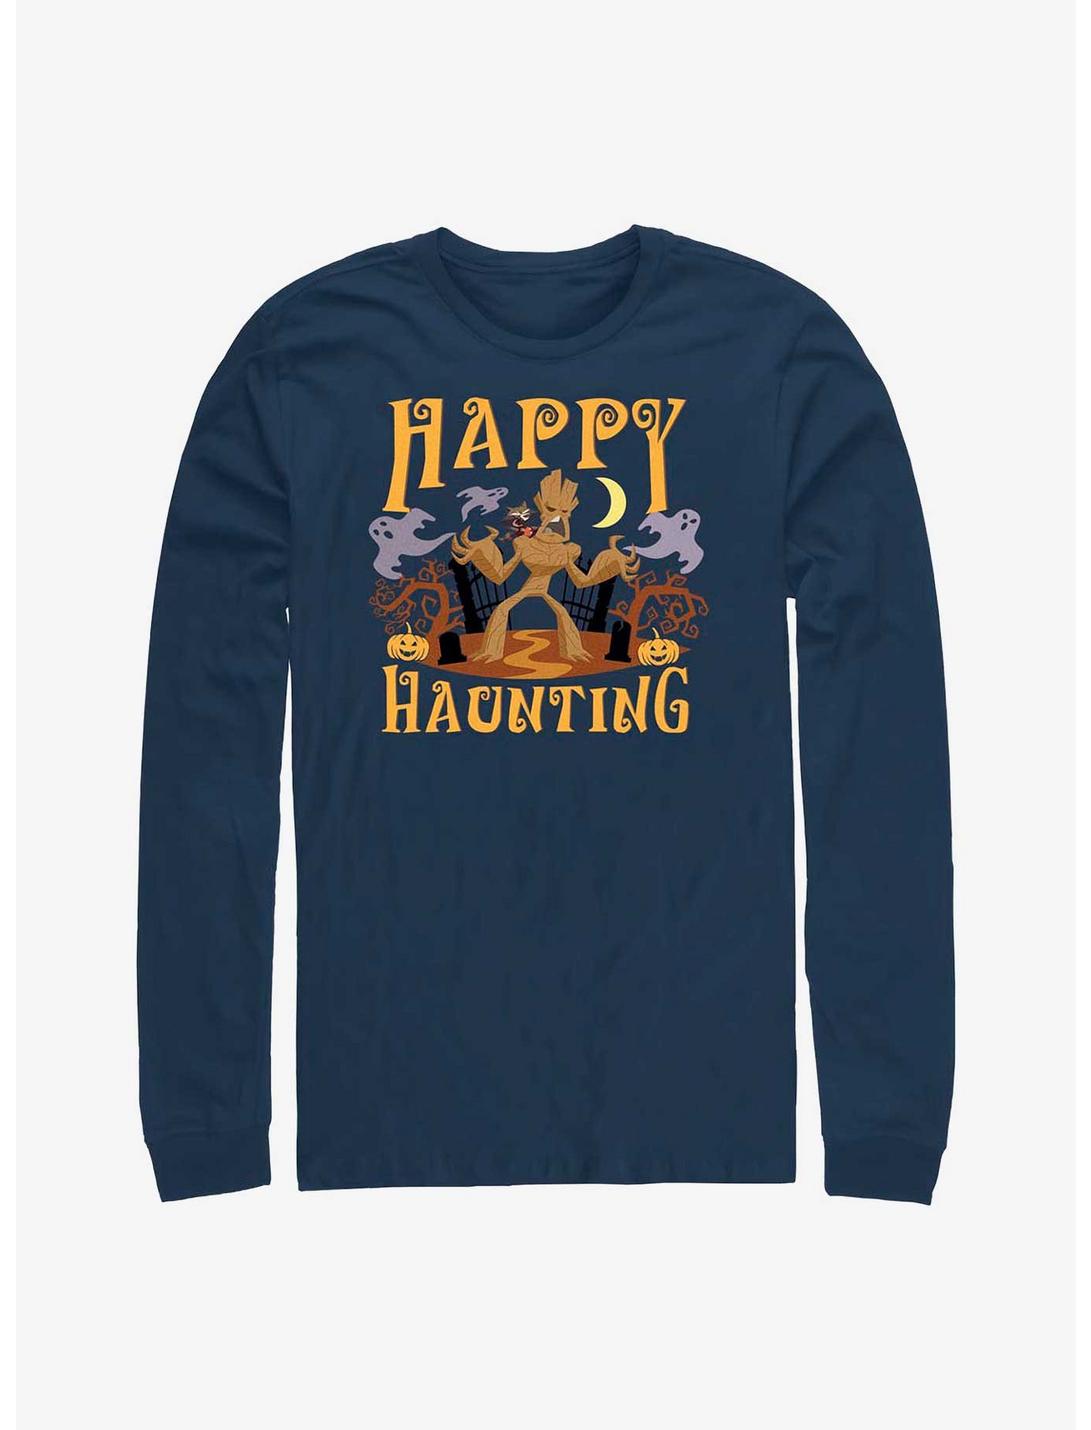 Marvel Guardians Of The Galaxy Happy Haunting Groot Long-Sleeve T-Shirt, NAVY, hi-res